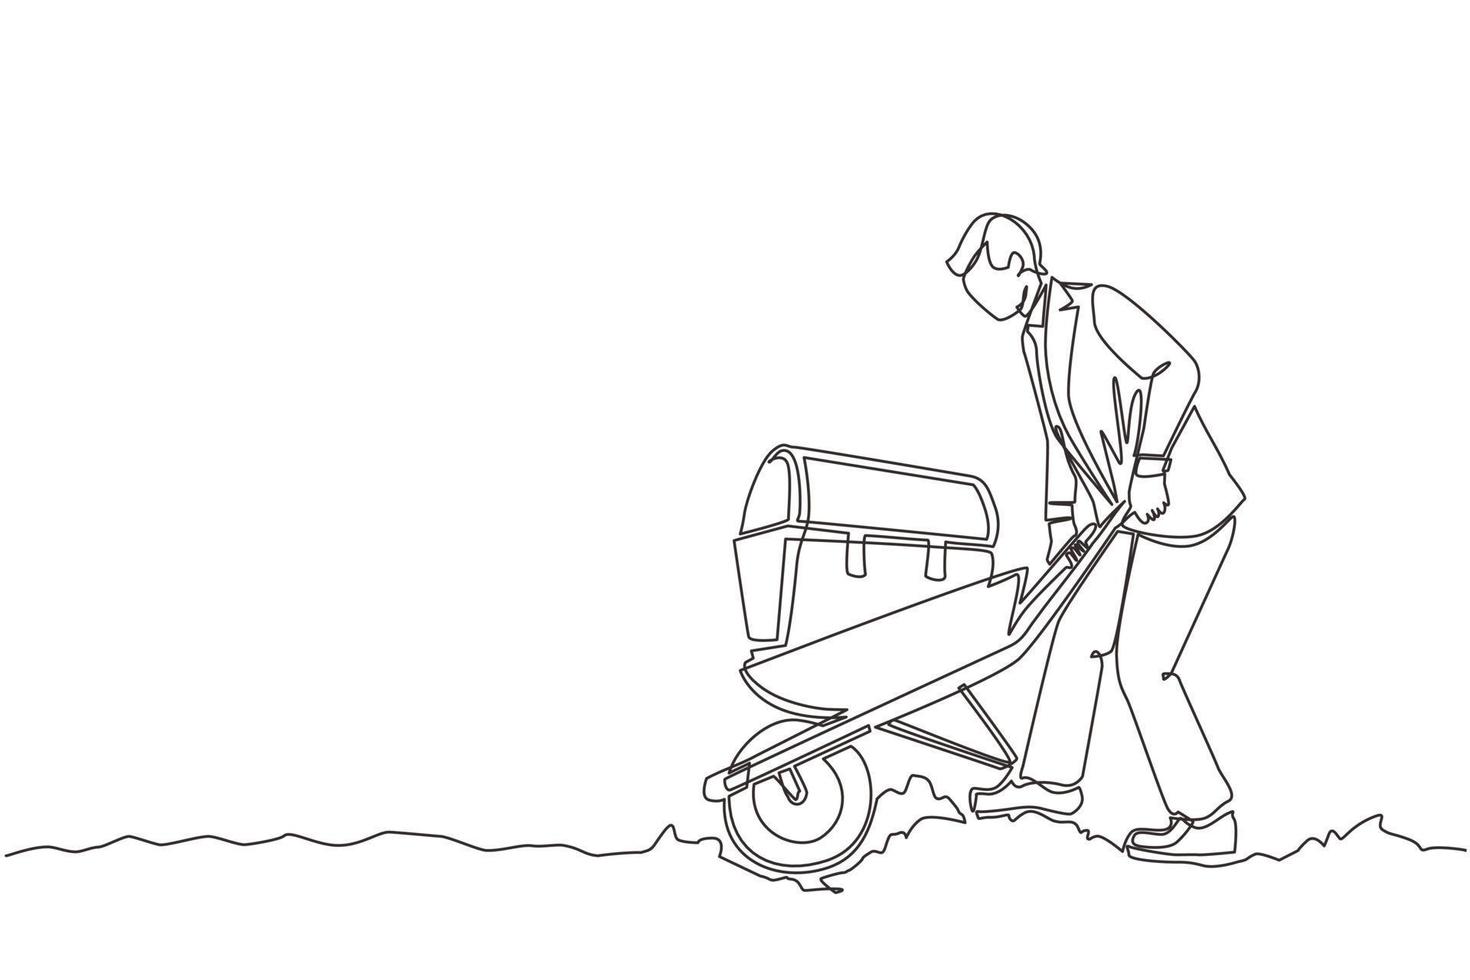 Single continuous line drawing happy businessman in suit pushing cart with treasure chest. Wheelbarrow with golds, jewelry, treasures. Business and finance concept. One line draw graphic design vector